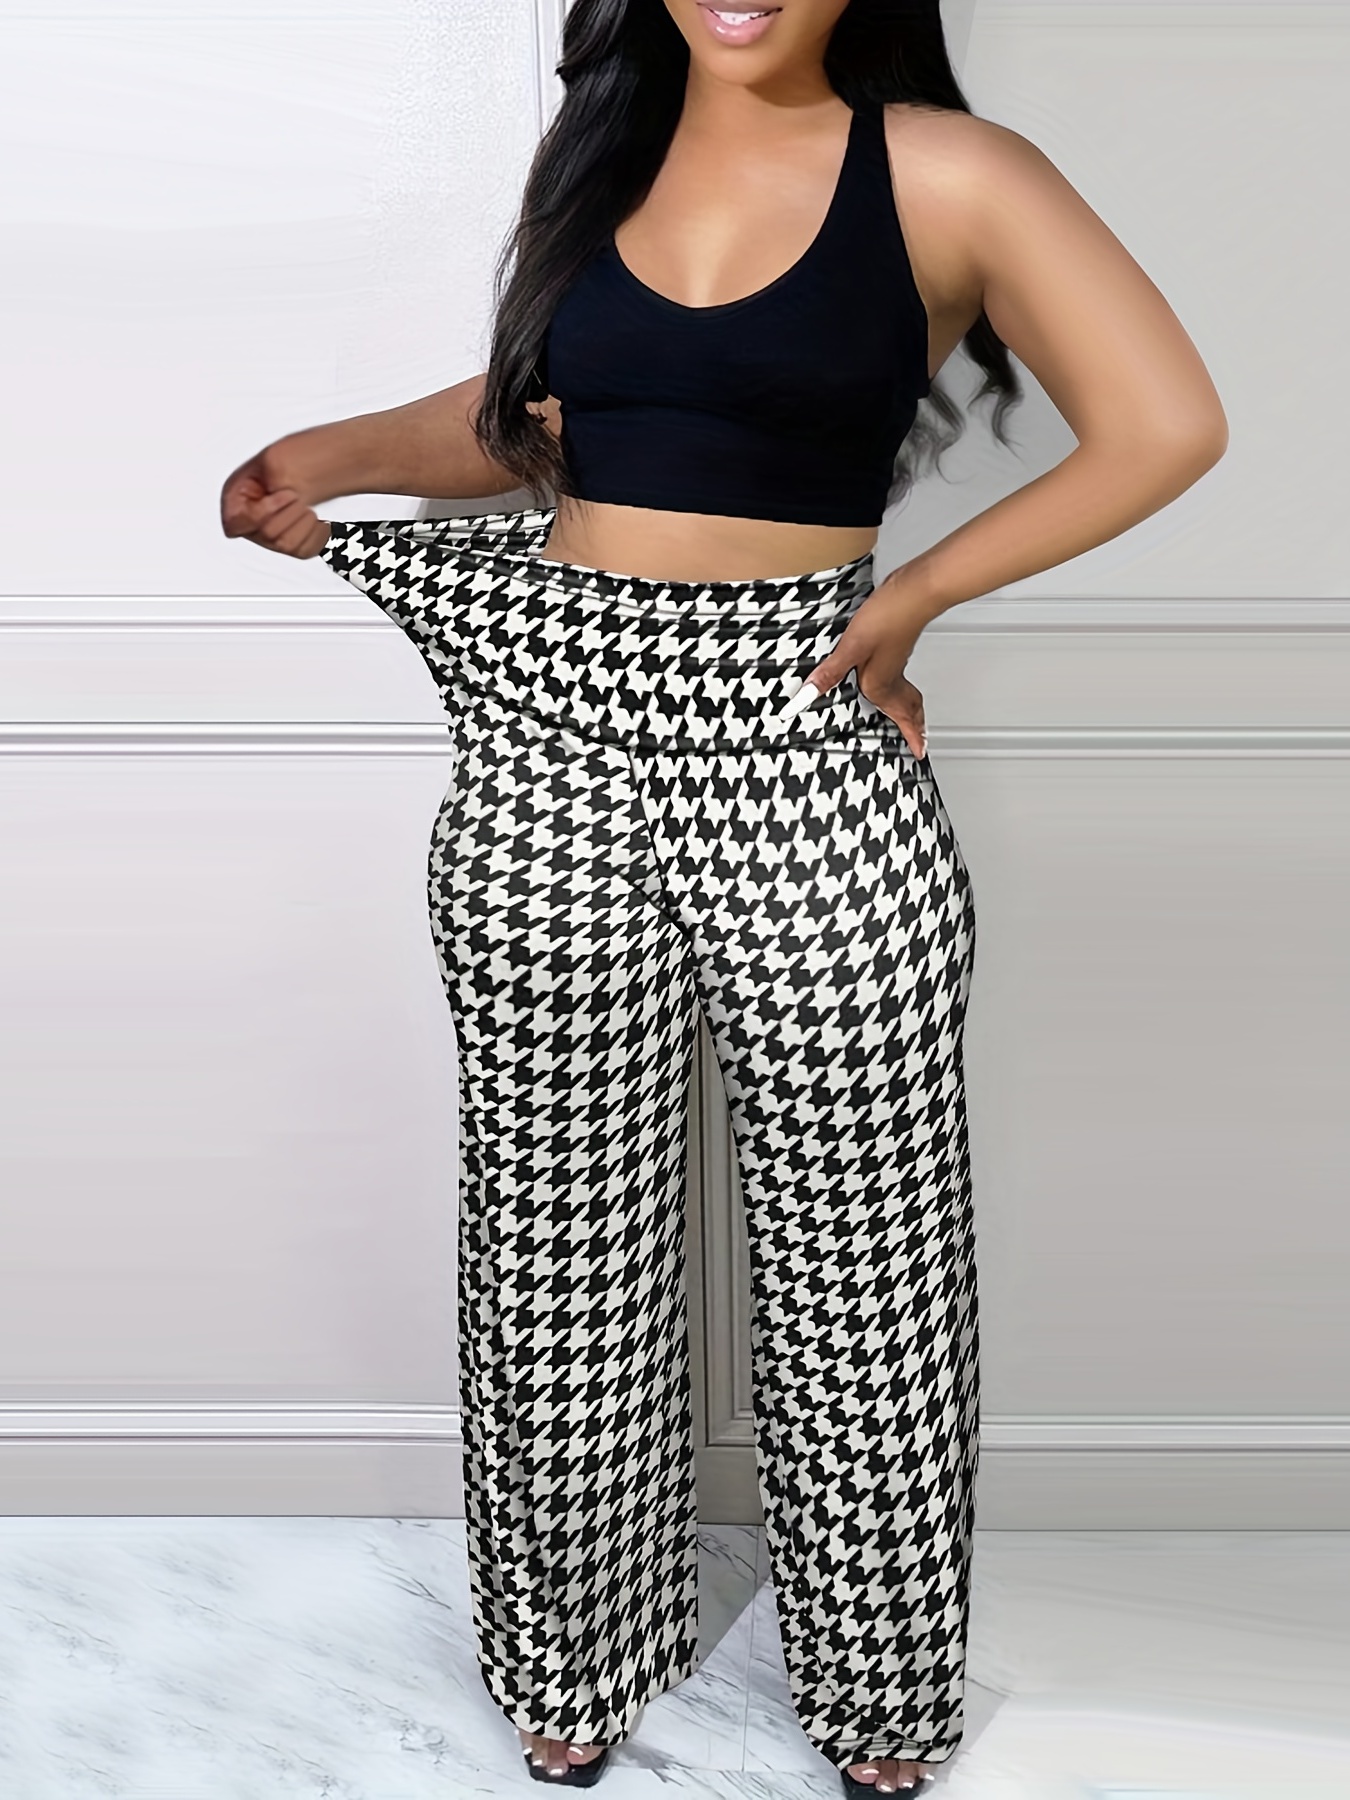 houndstooth pants!